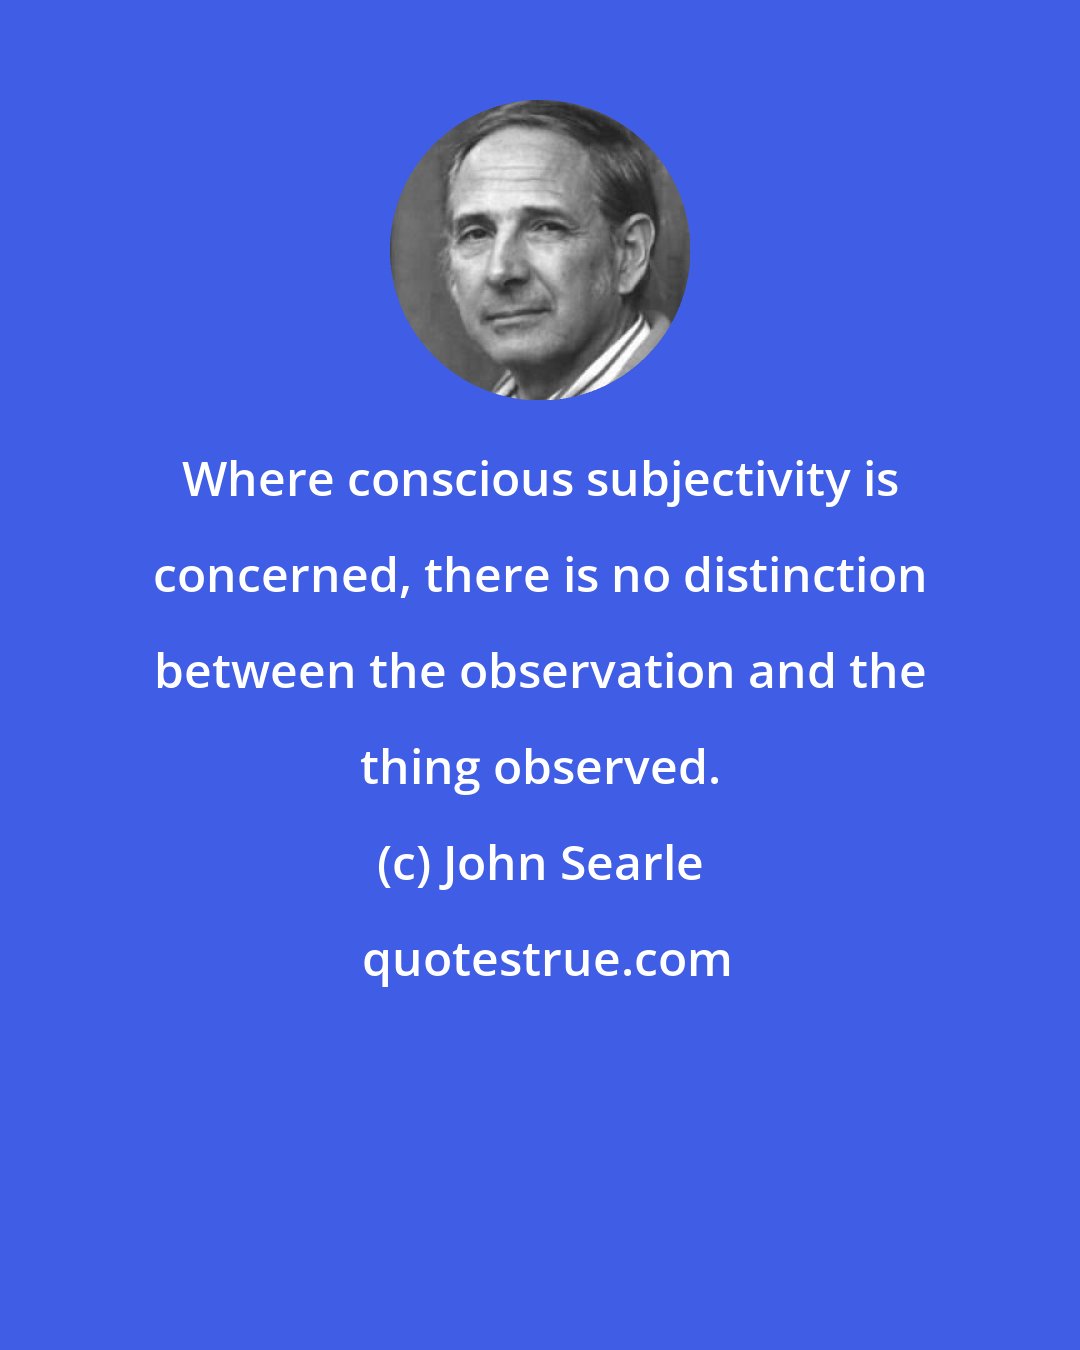 John Searle: Where conscious subjectivity is concerned, there is no distinction between the observation and the thing observed.